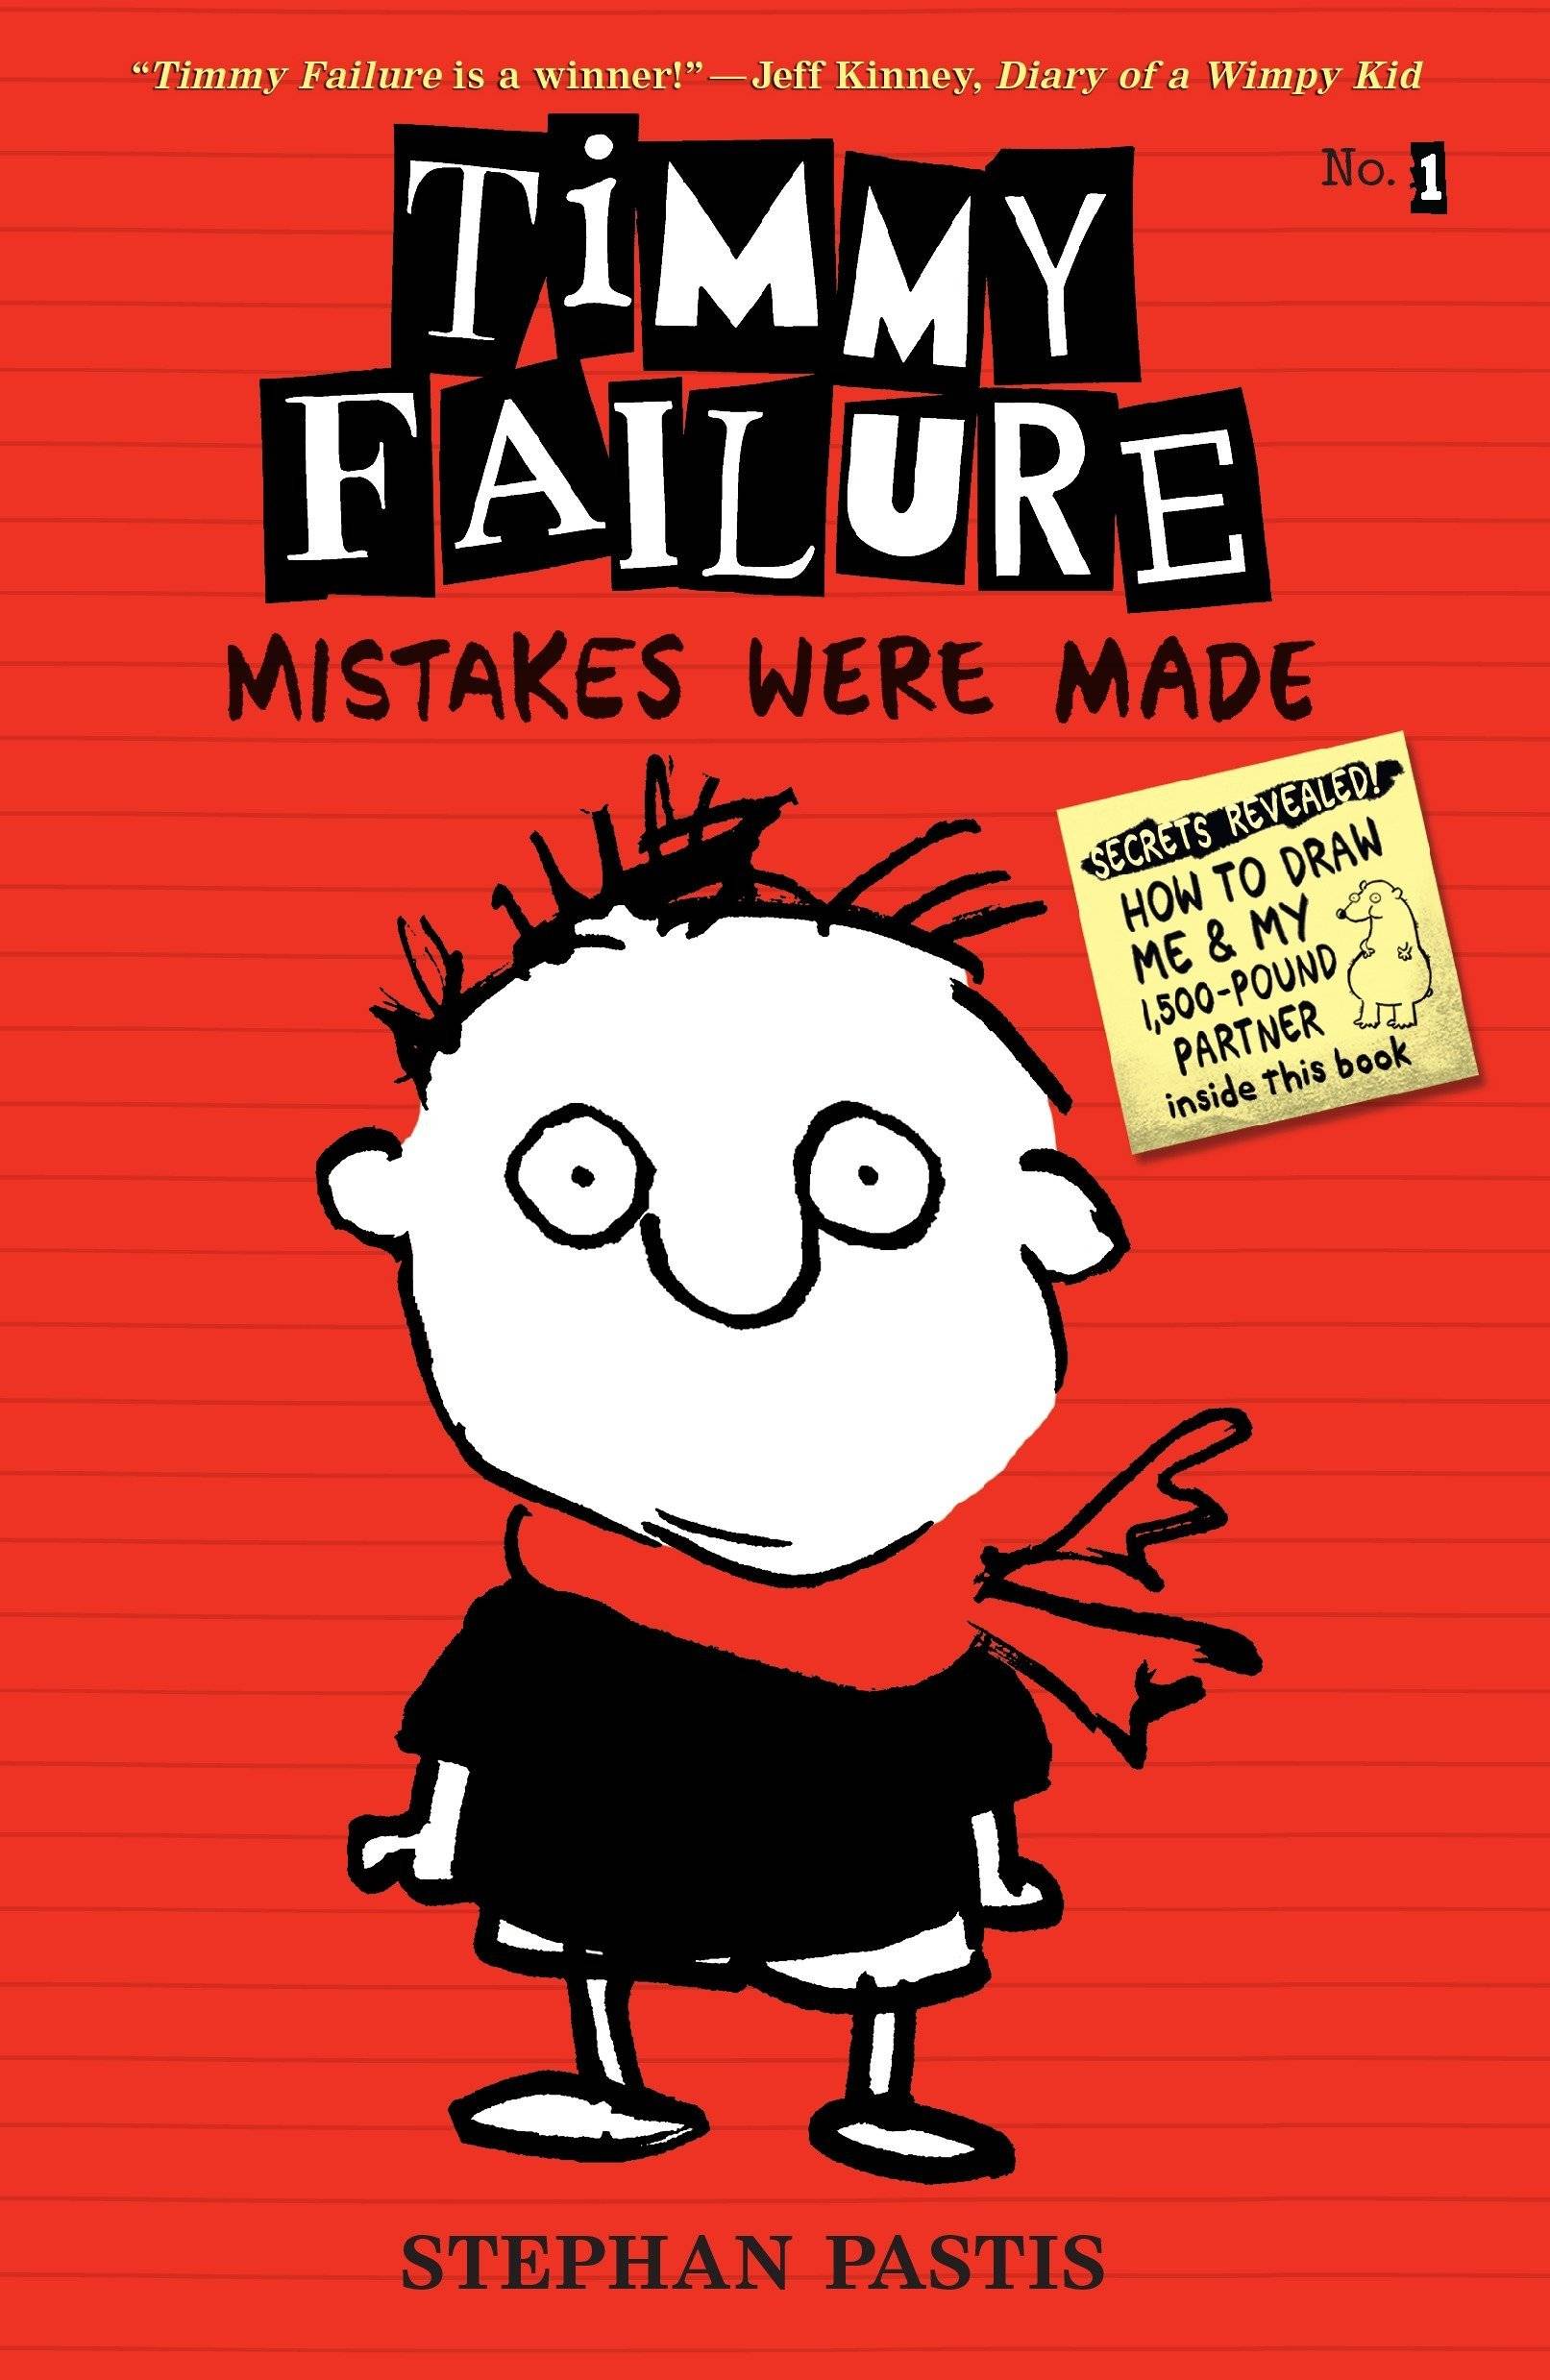 IMG : Timmy Failure Mistakes were made#1